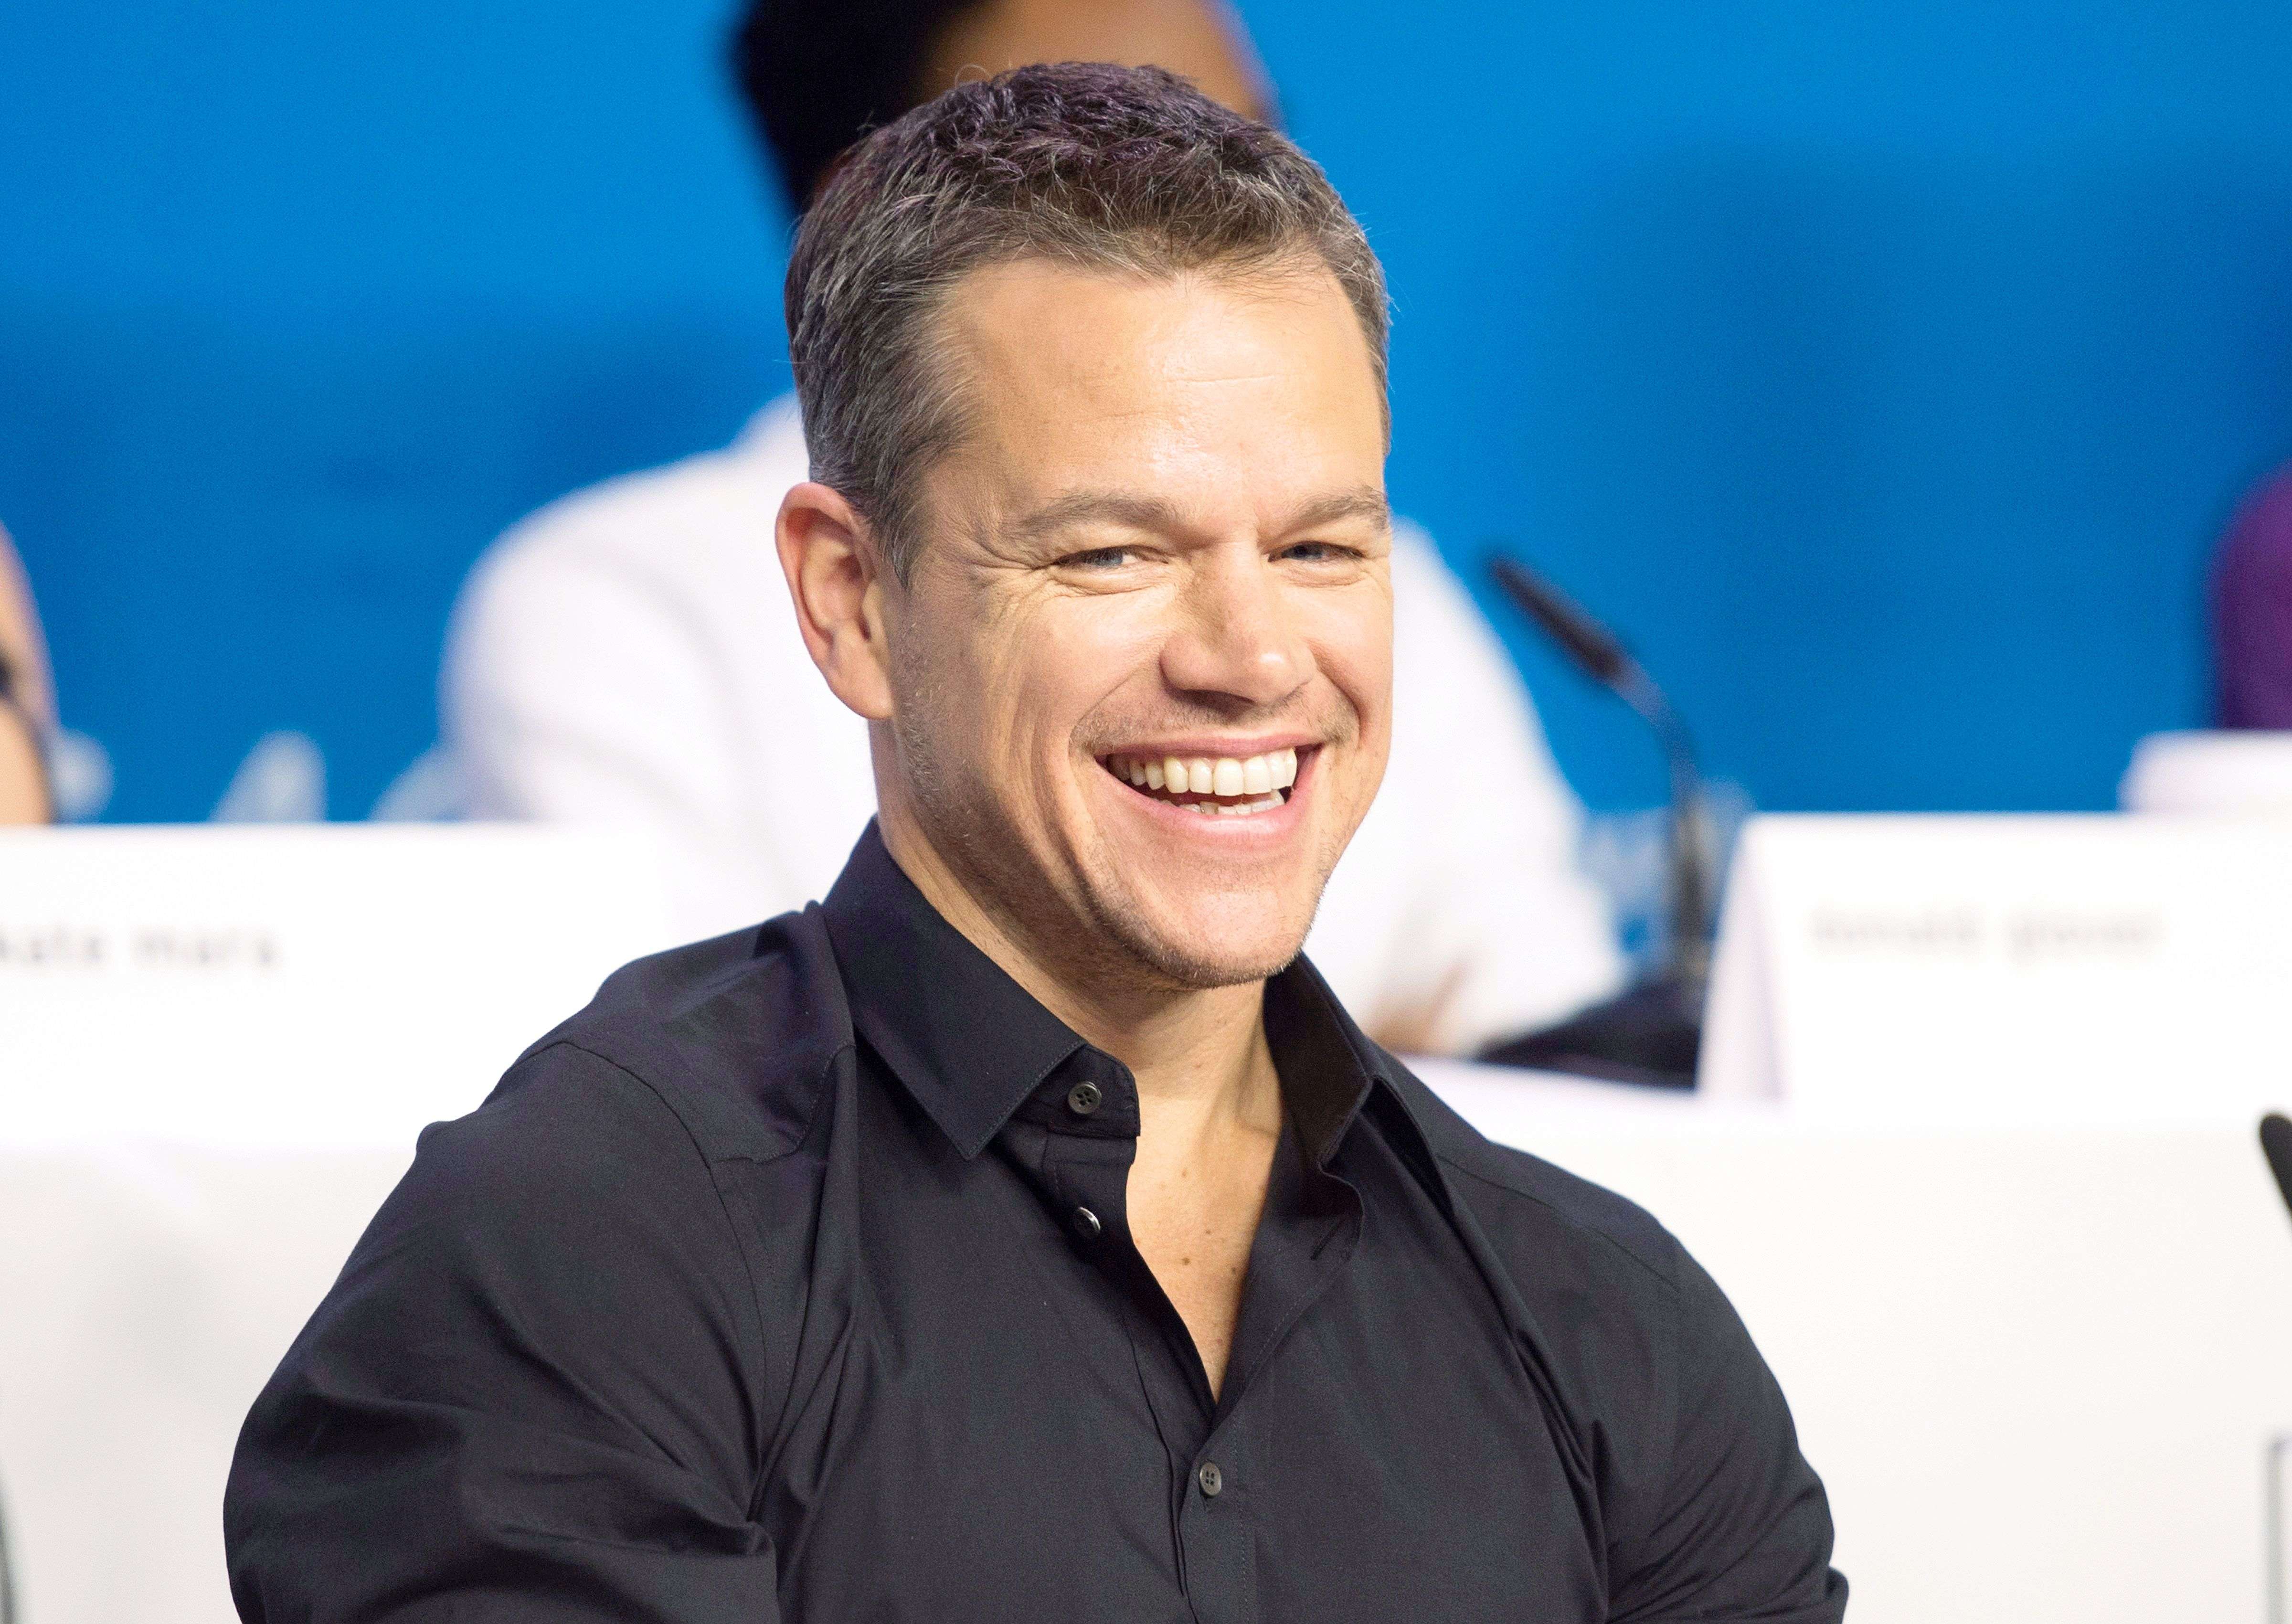 FILE - In this Sept. 11, 2015 file photo, actor Matt Damon laughs during a press conference promoting the film "The Martian" during the 2015 Toronto International Film Festival in Toronto. Damon has been selected to deliver the universitys 2016 commencement address. MIT announced Thursday, Dec. 10, that the Academy Award-winning actor, filmmaker, social activist and Cambridge native will address graduates on June 3.  (Darren Calabrese/The Canadian Press via AP, File)